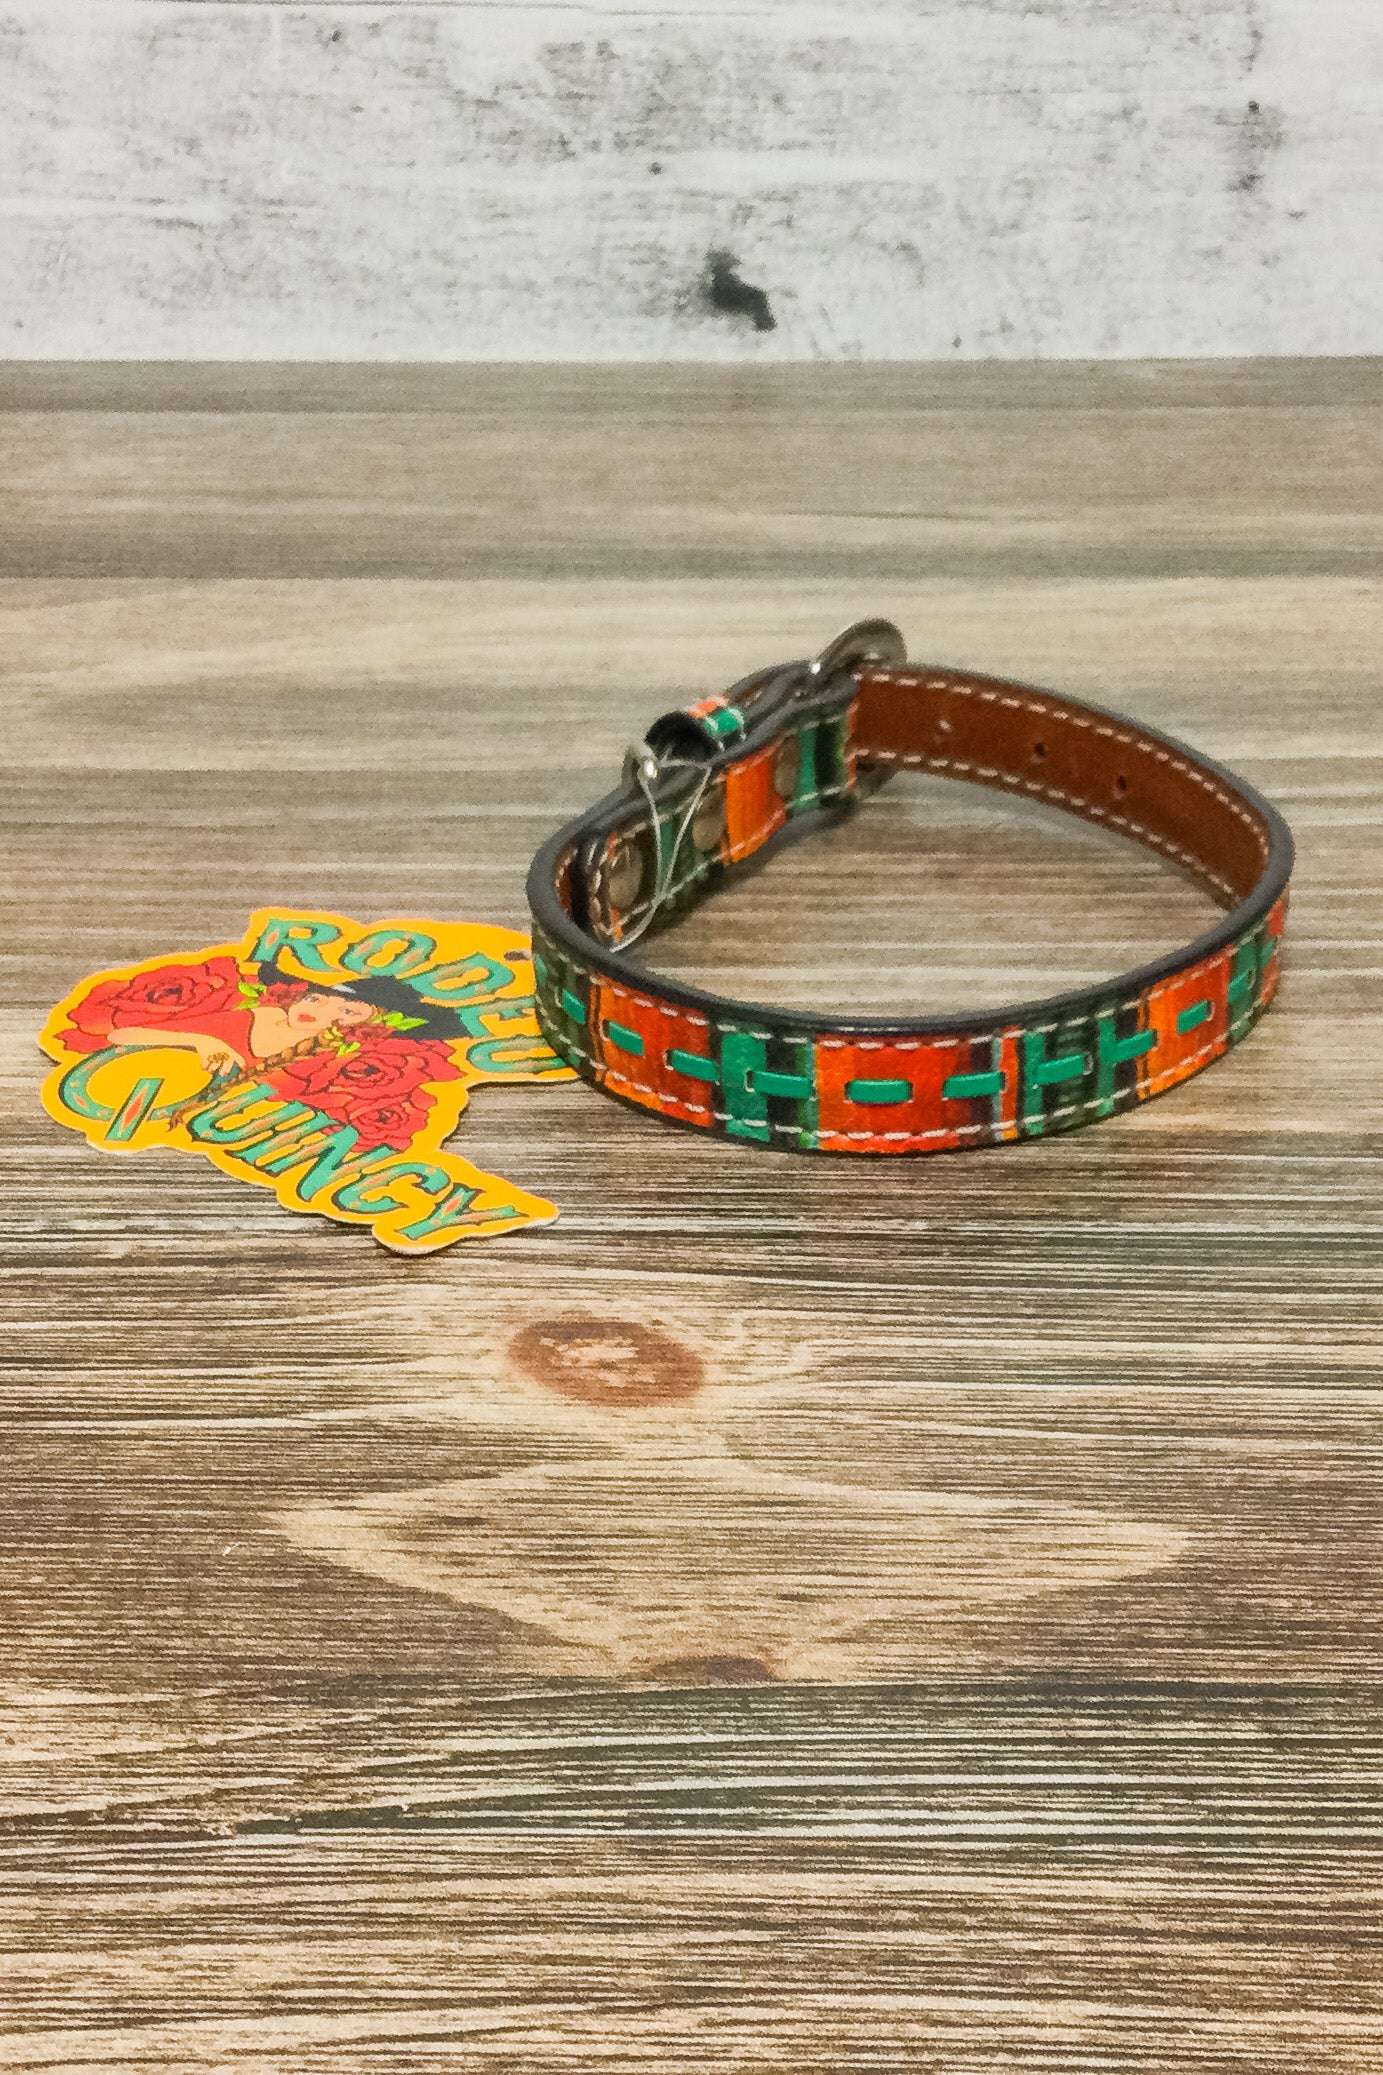 Rodeo Quincy Printed Leather Dog Collar - Serape - The Glamorous Cowgirl